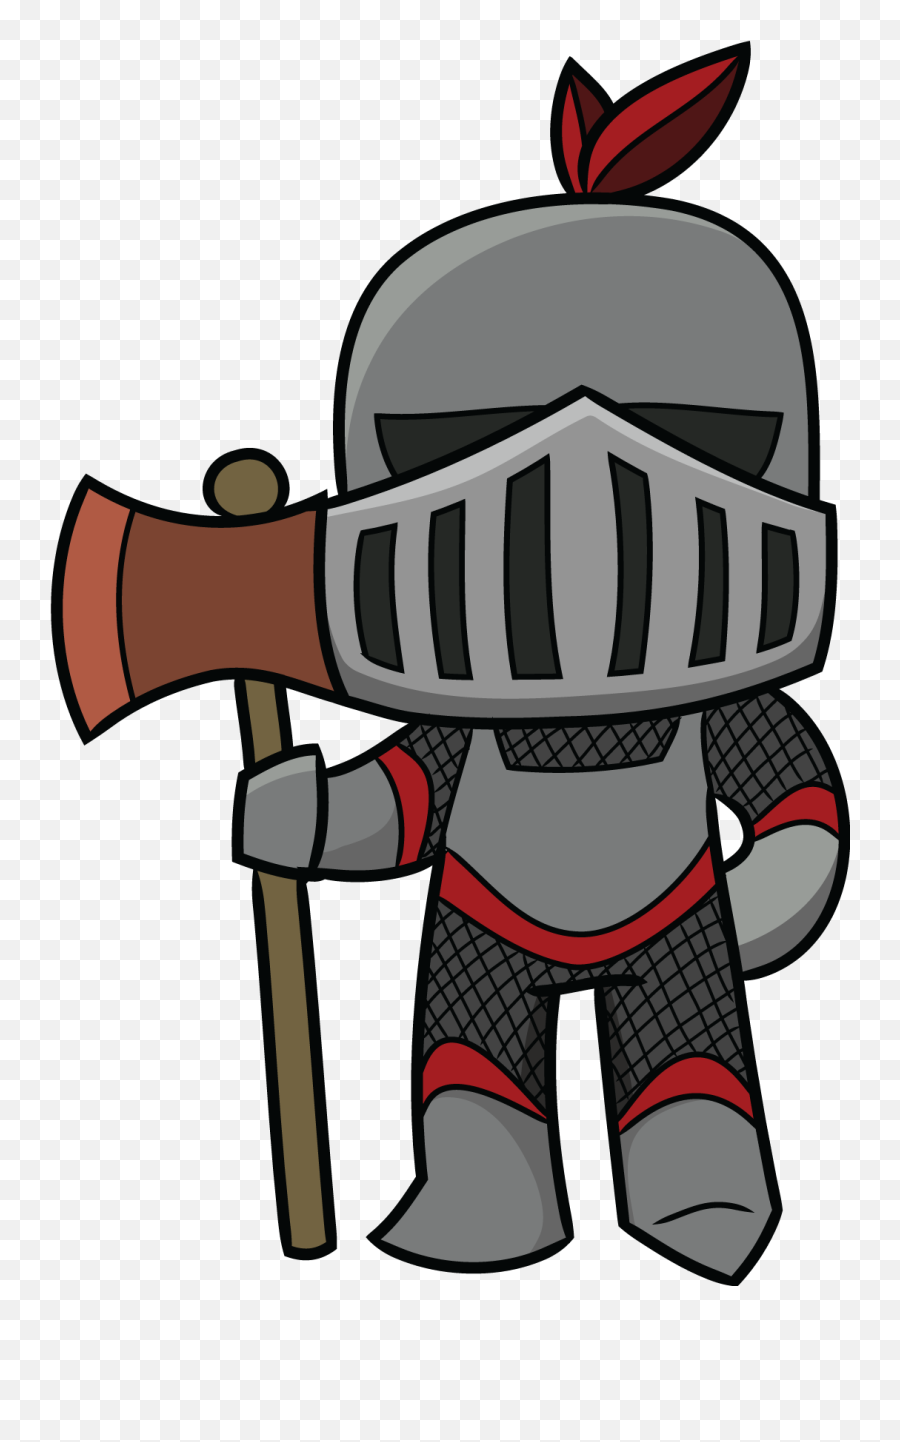 Knight Free To Use Cliparts 3 - Knights Middle Ages Cartoon Emoji,Knights Emoji